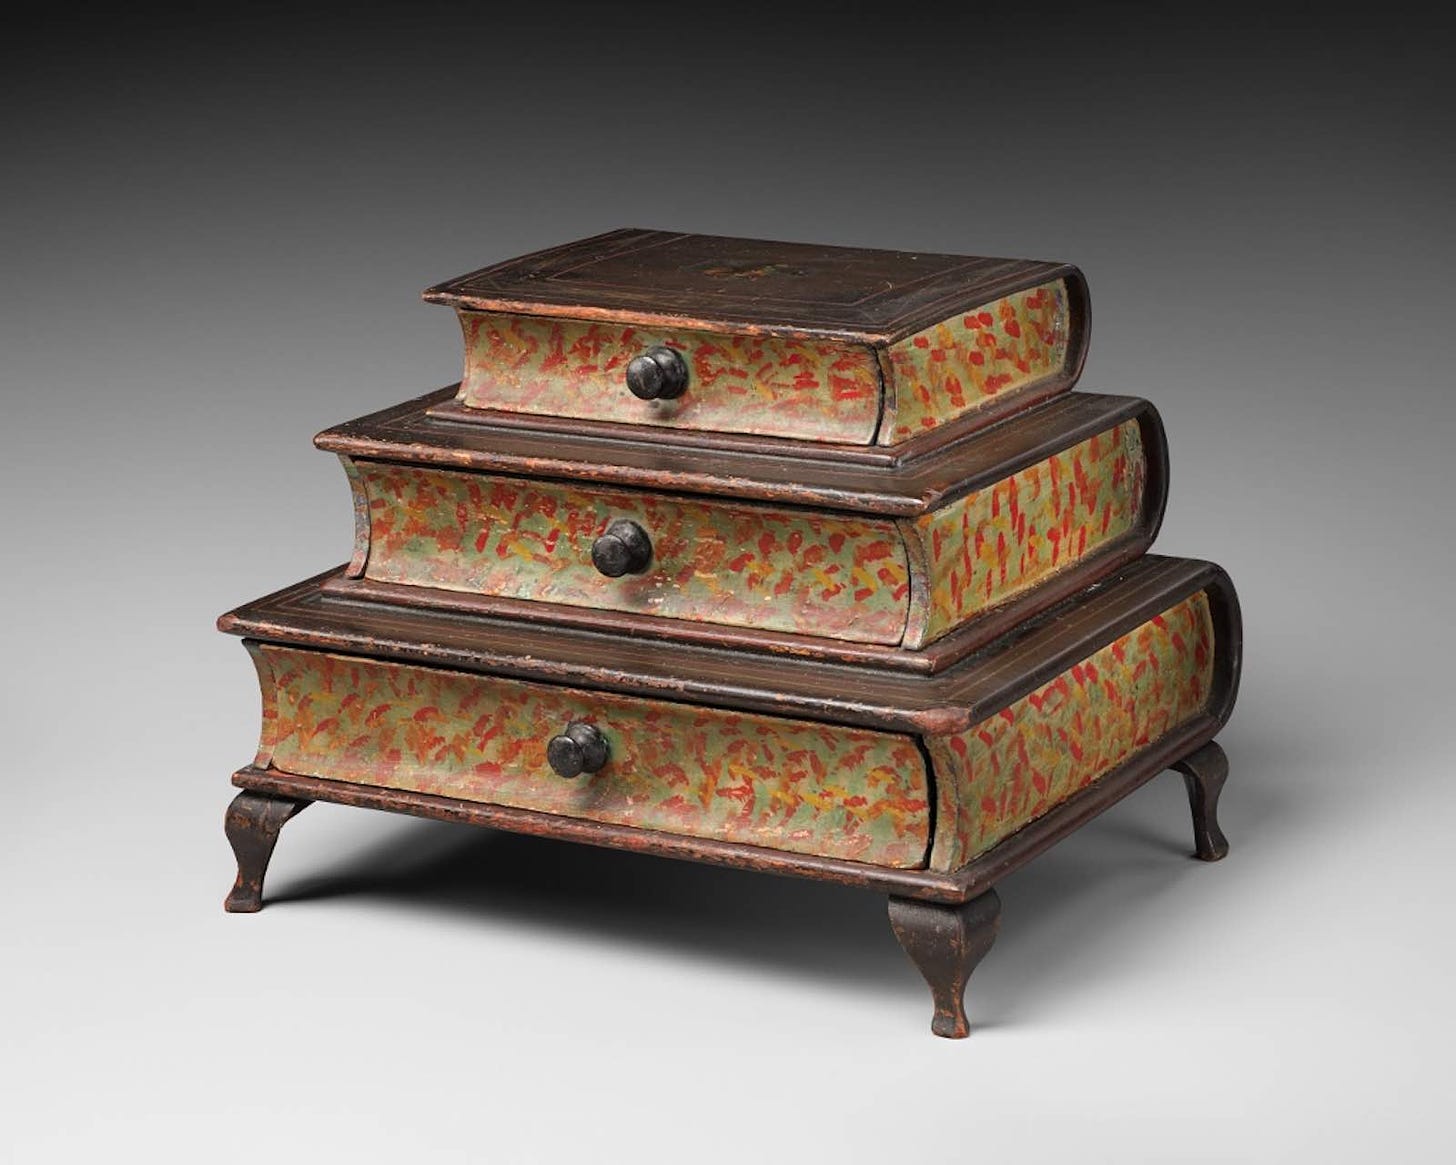 Maker unknown, graduated, three-tiered, footed box in book form c. 1870. American [Maine], painted wood (yellow poplar, birch). 18.0 x 23.0 x 16.3 cm. Gift of Lynn and Bruce Heckman, 2023